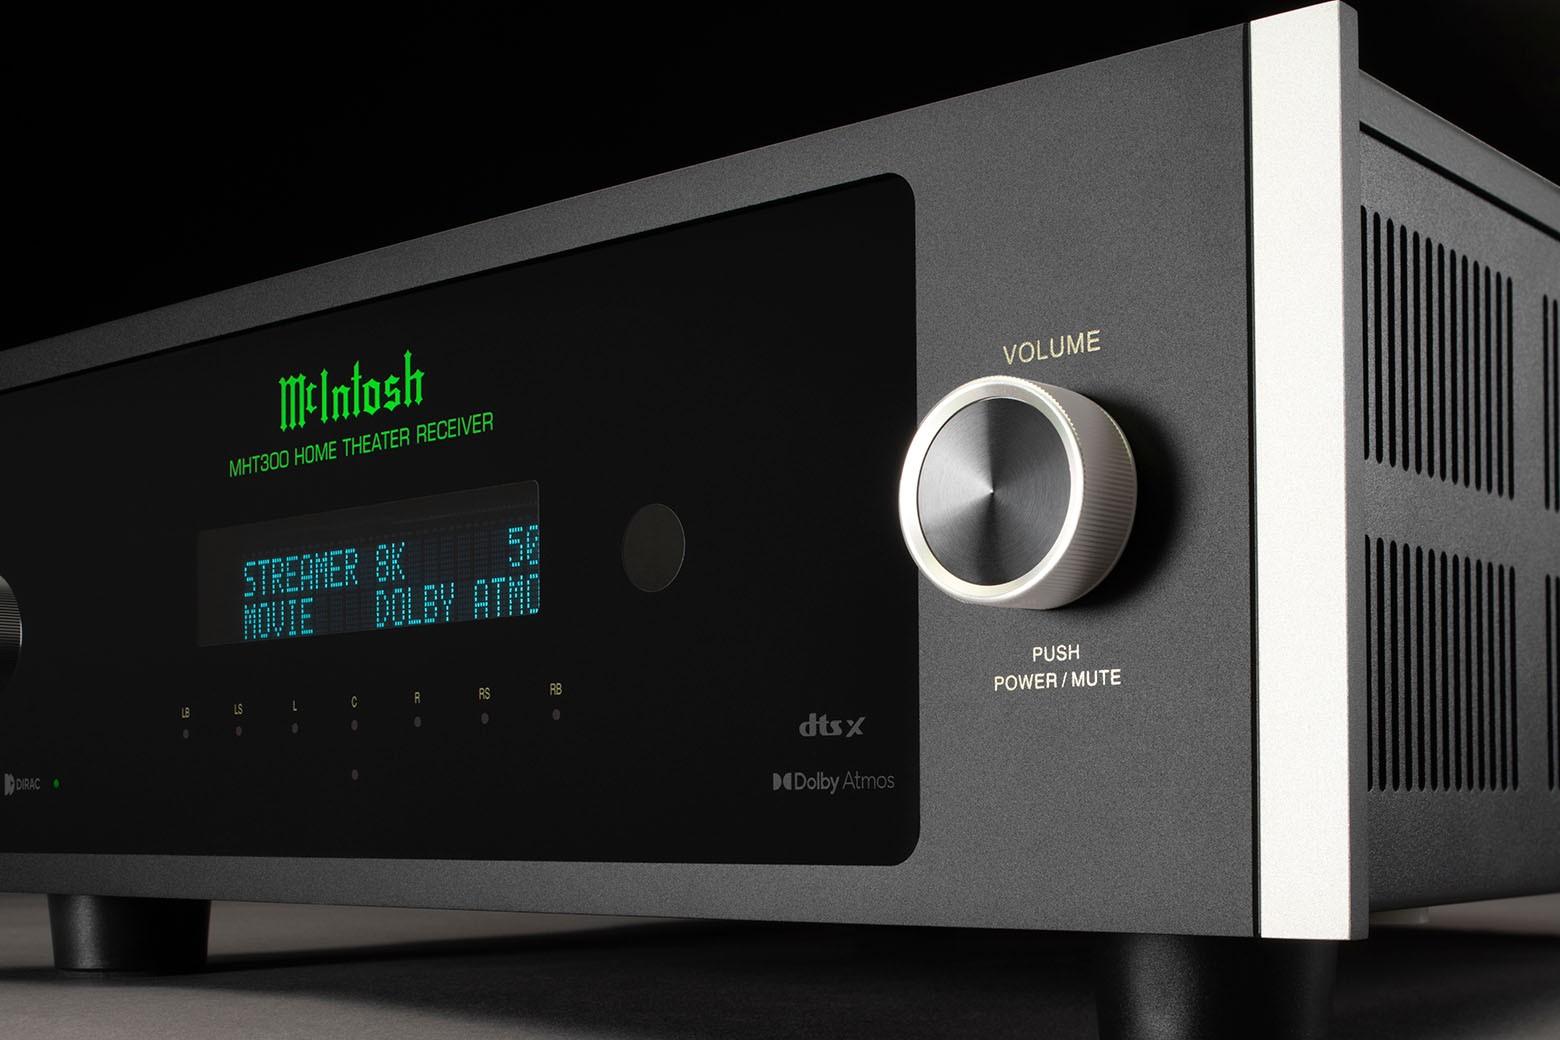 Watch out - McIntosh has raised the bar with an extremely capable amp section for a home theater receiver. ea74f829 mht300 angle right close up